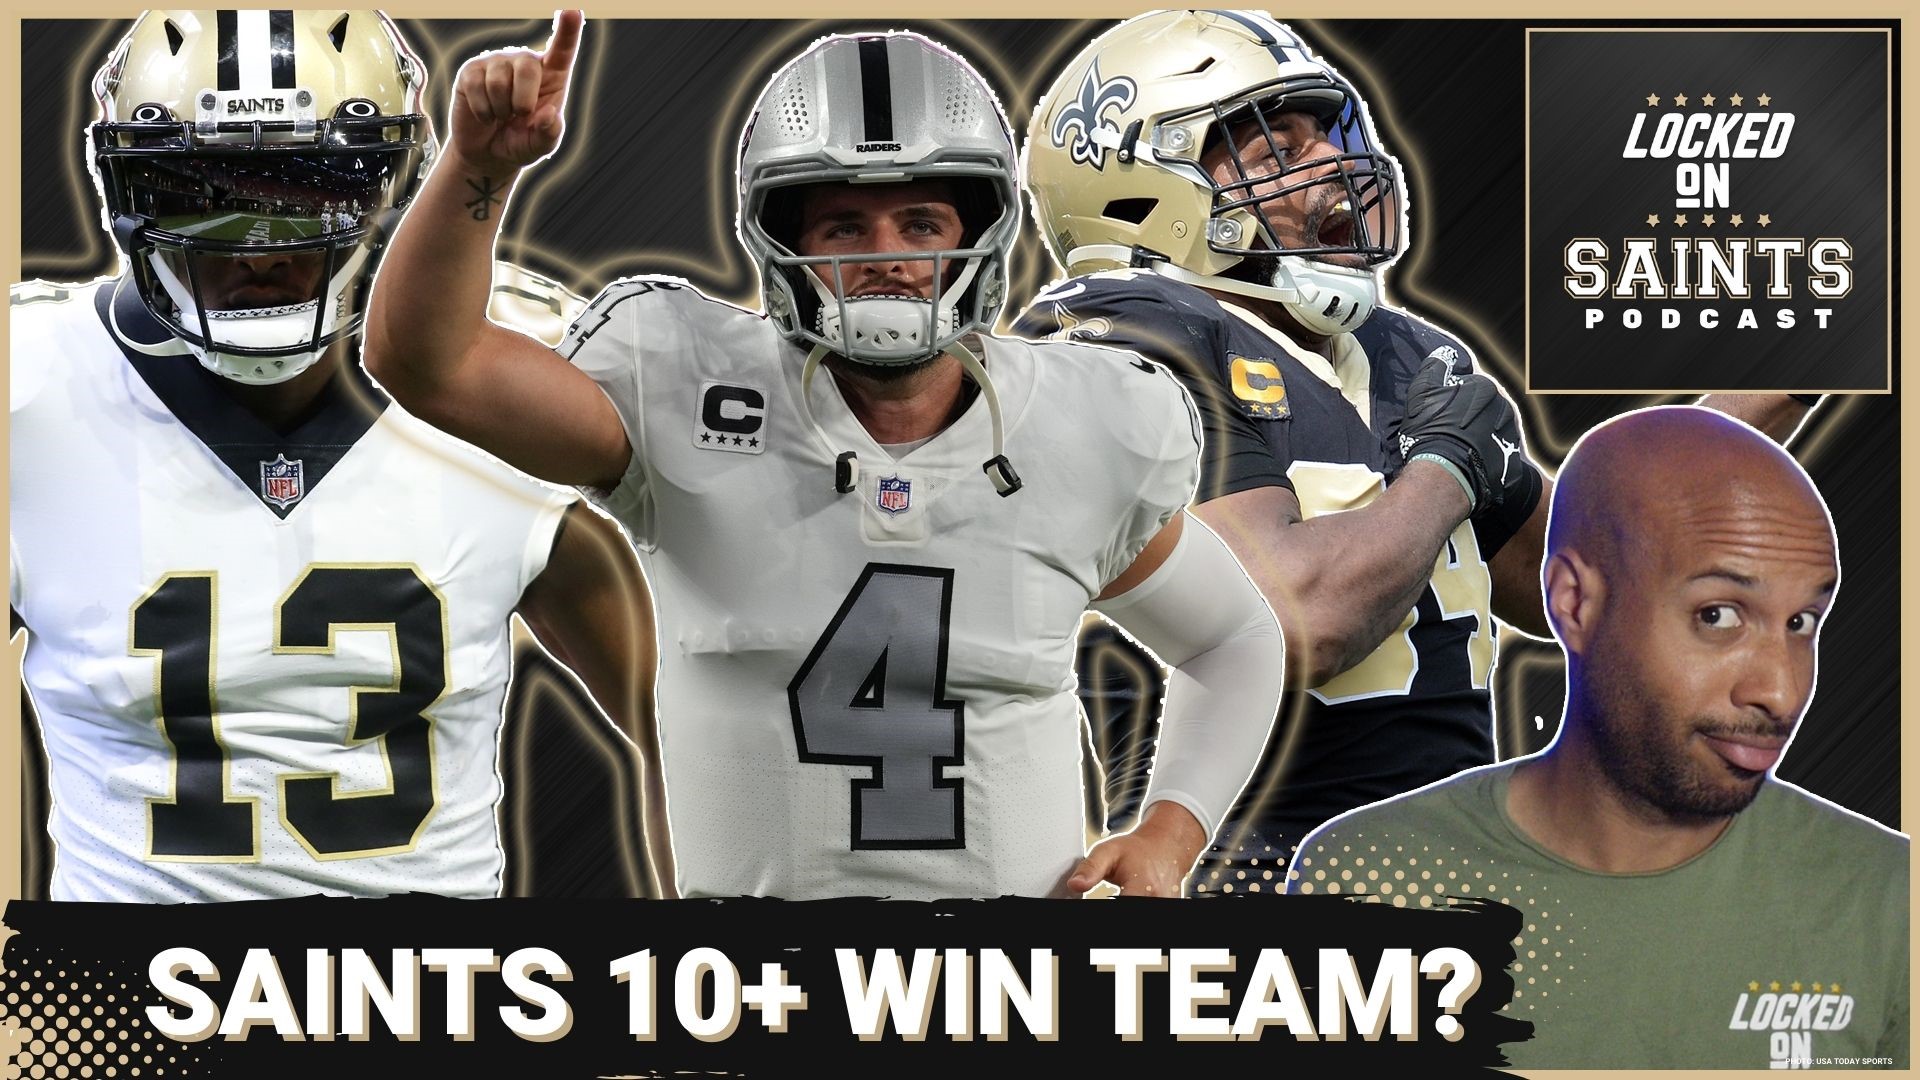 The New Orleans Saints should be a 10+ win team with Derek Carr, Cameron Jordan and Michael Thomas along with a favorable schedule.